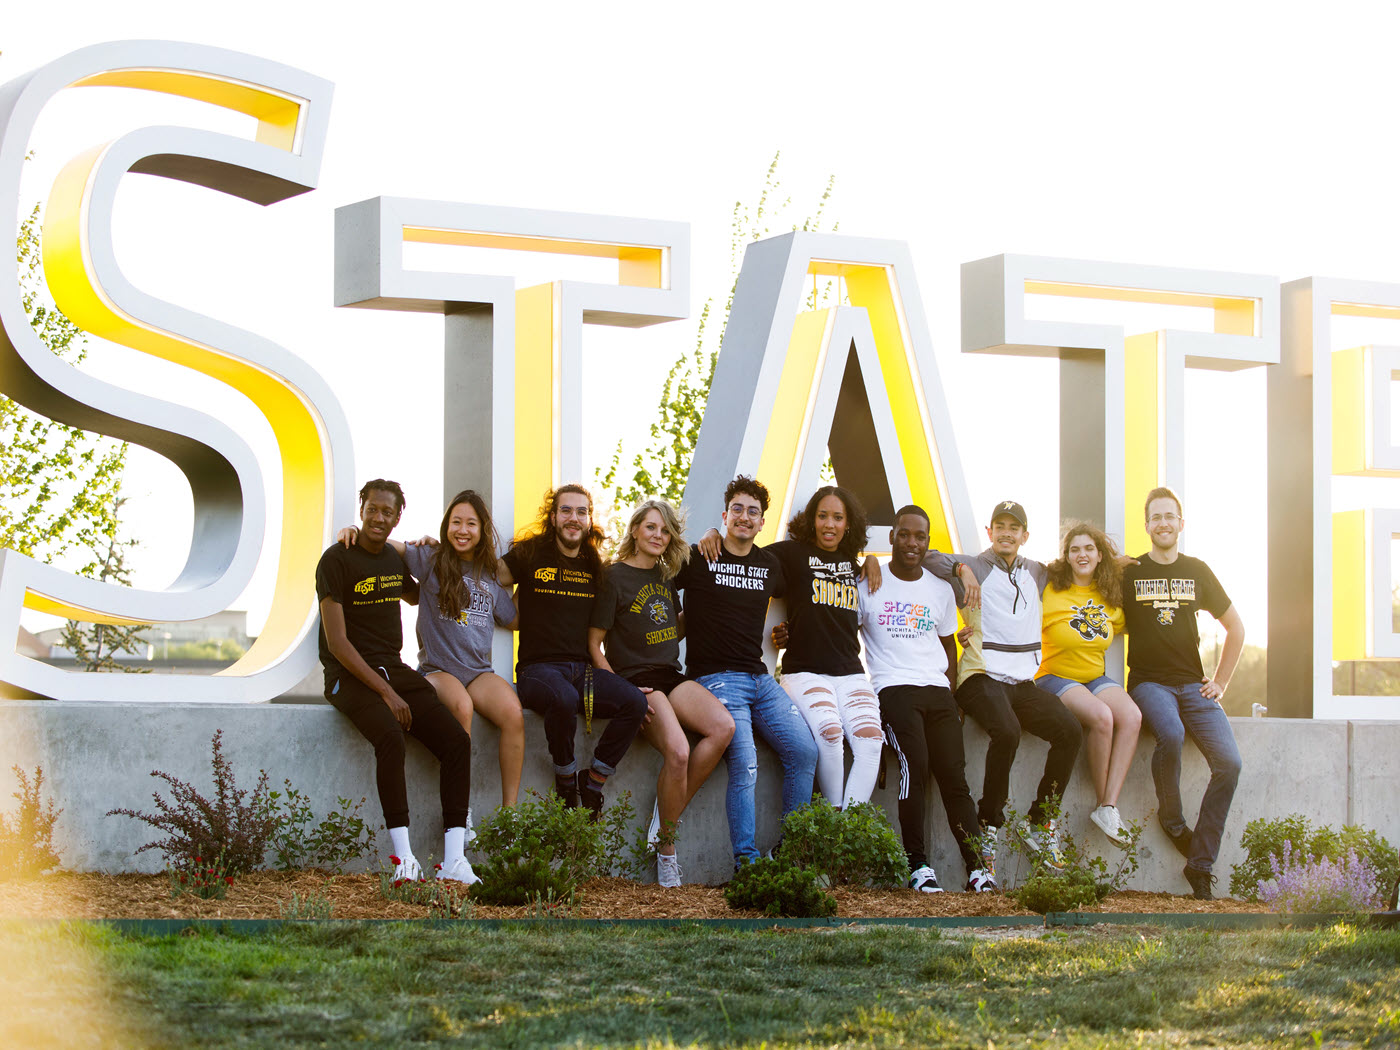 Students in front of Wichita State sign